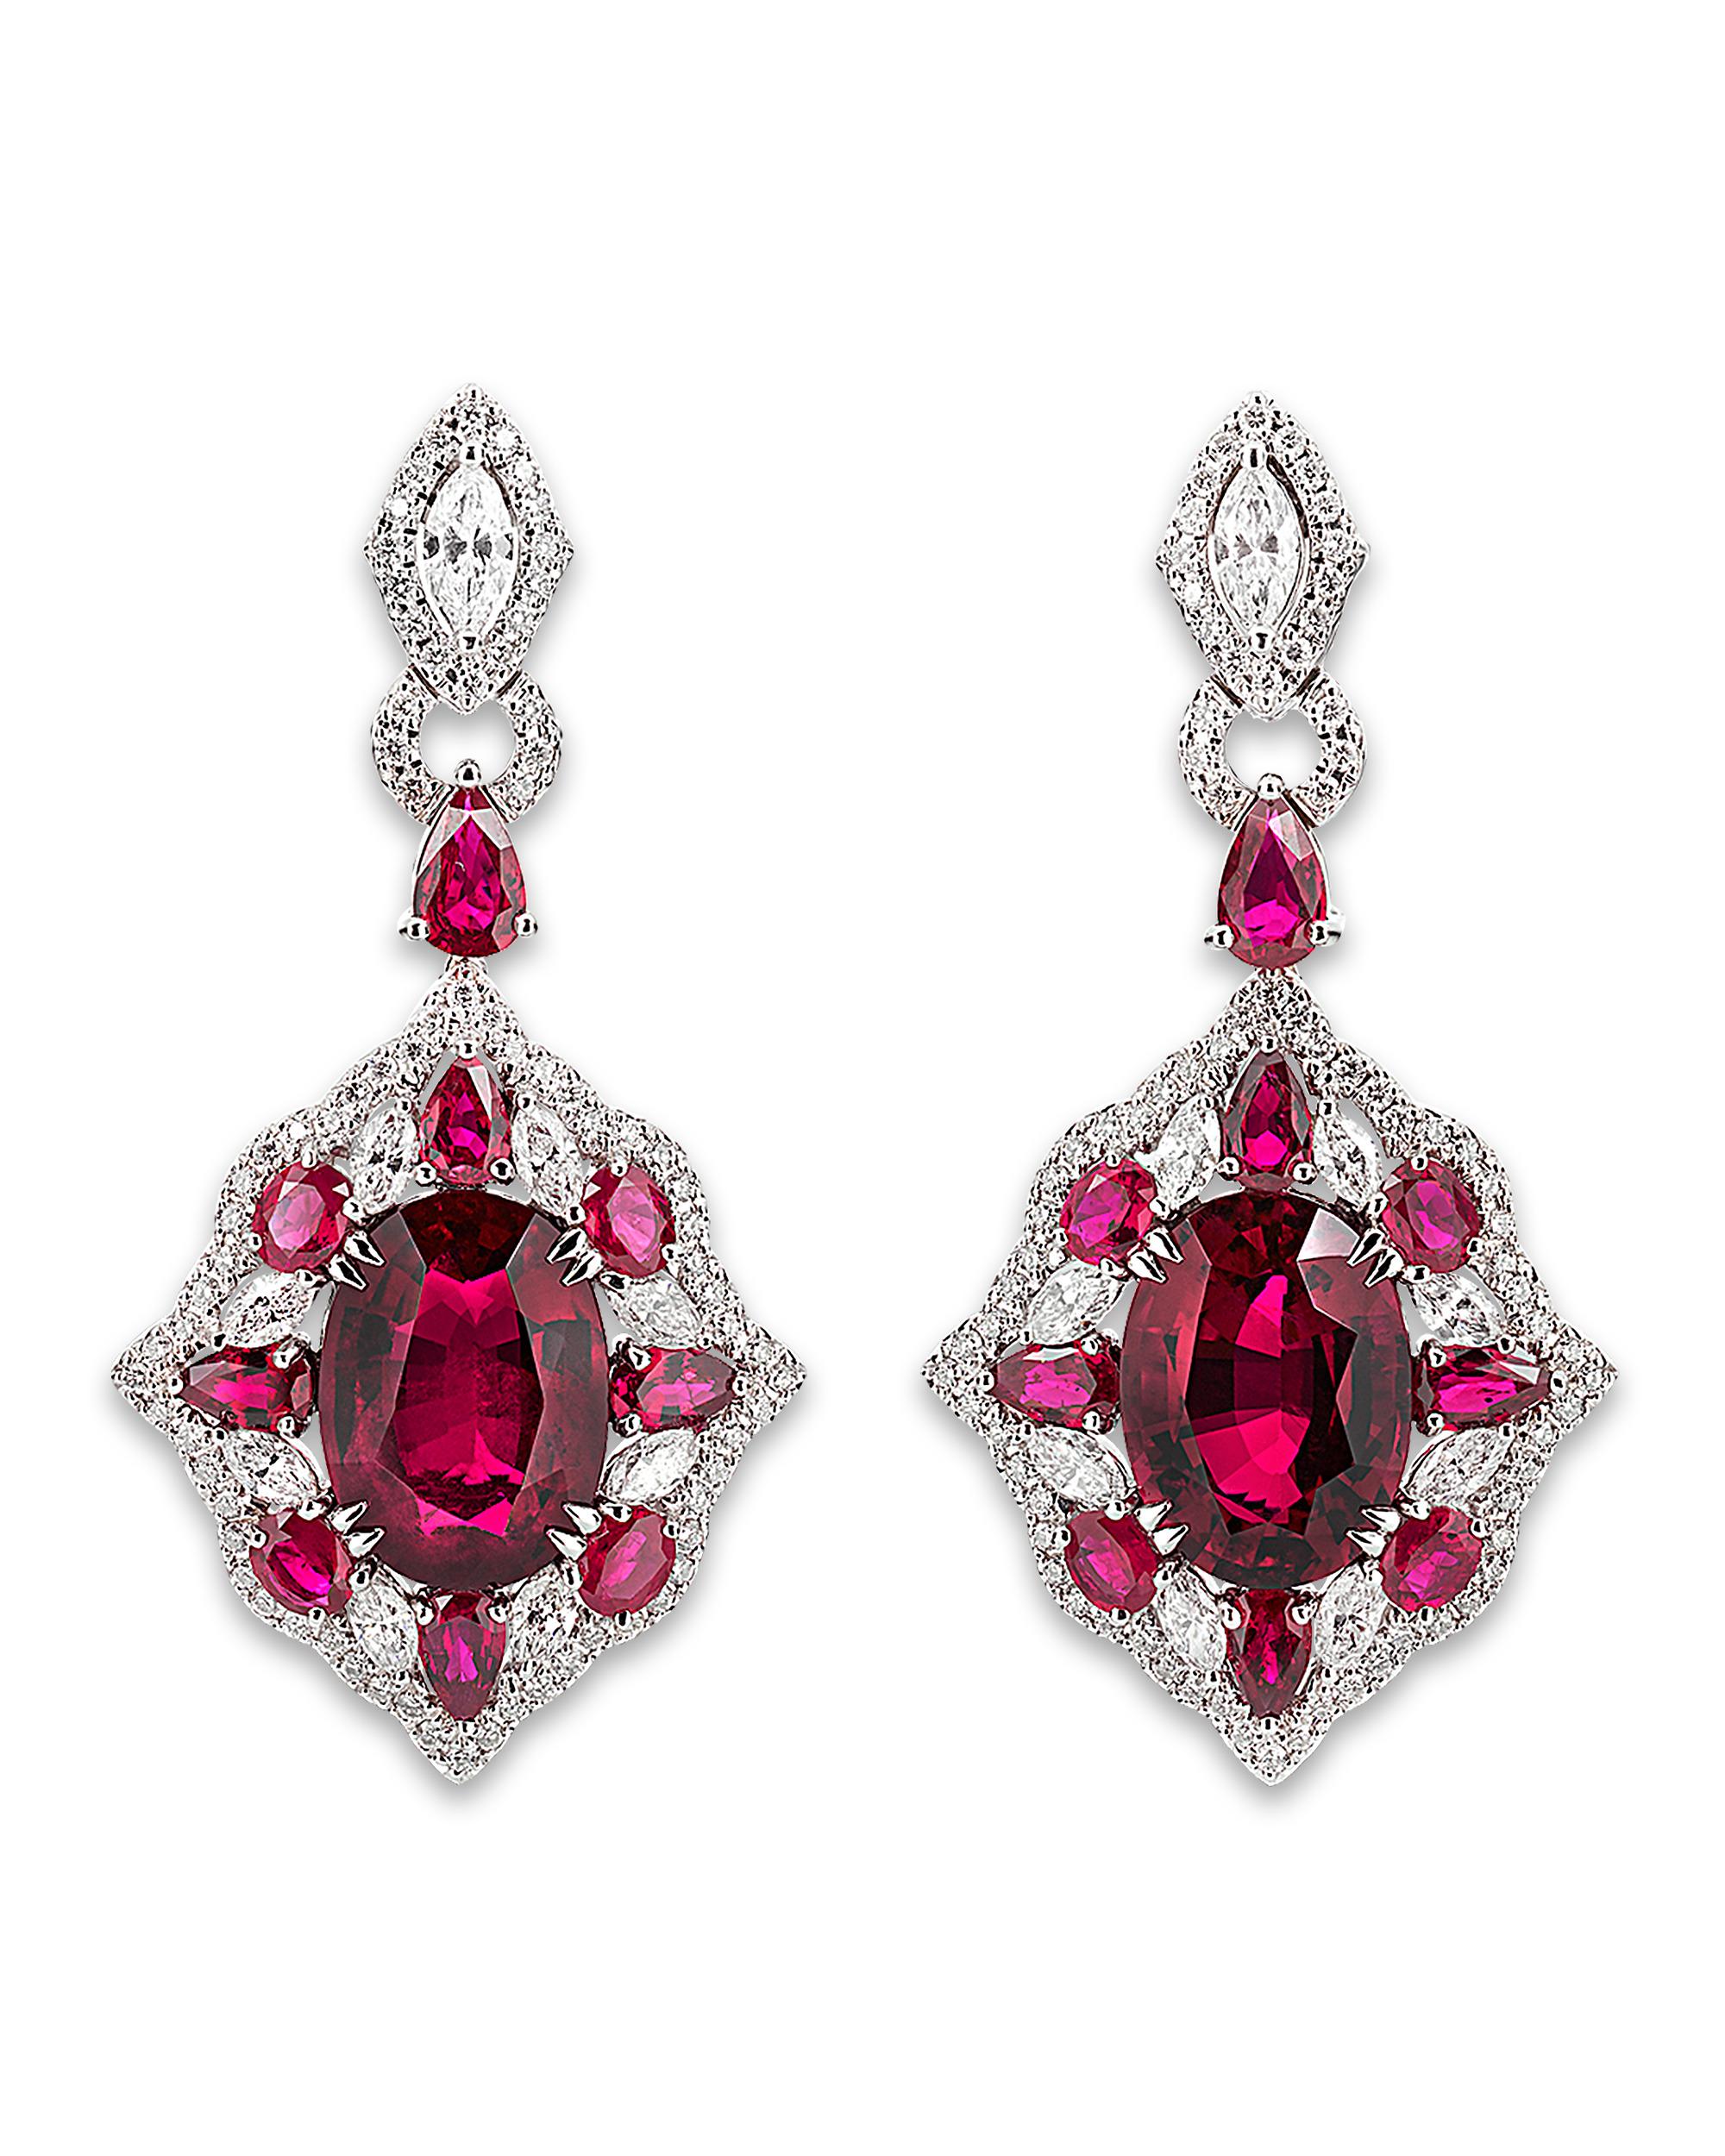 The rich crimson hue of rubellite tourmalines is beautifully complemented by brilliant white diamonds in these extraordinary earrings. Two rubellites totaling 11.15 carats are the stars of the wearable treasures, exuding elegance and luxury.